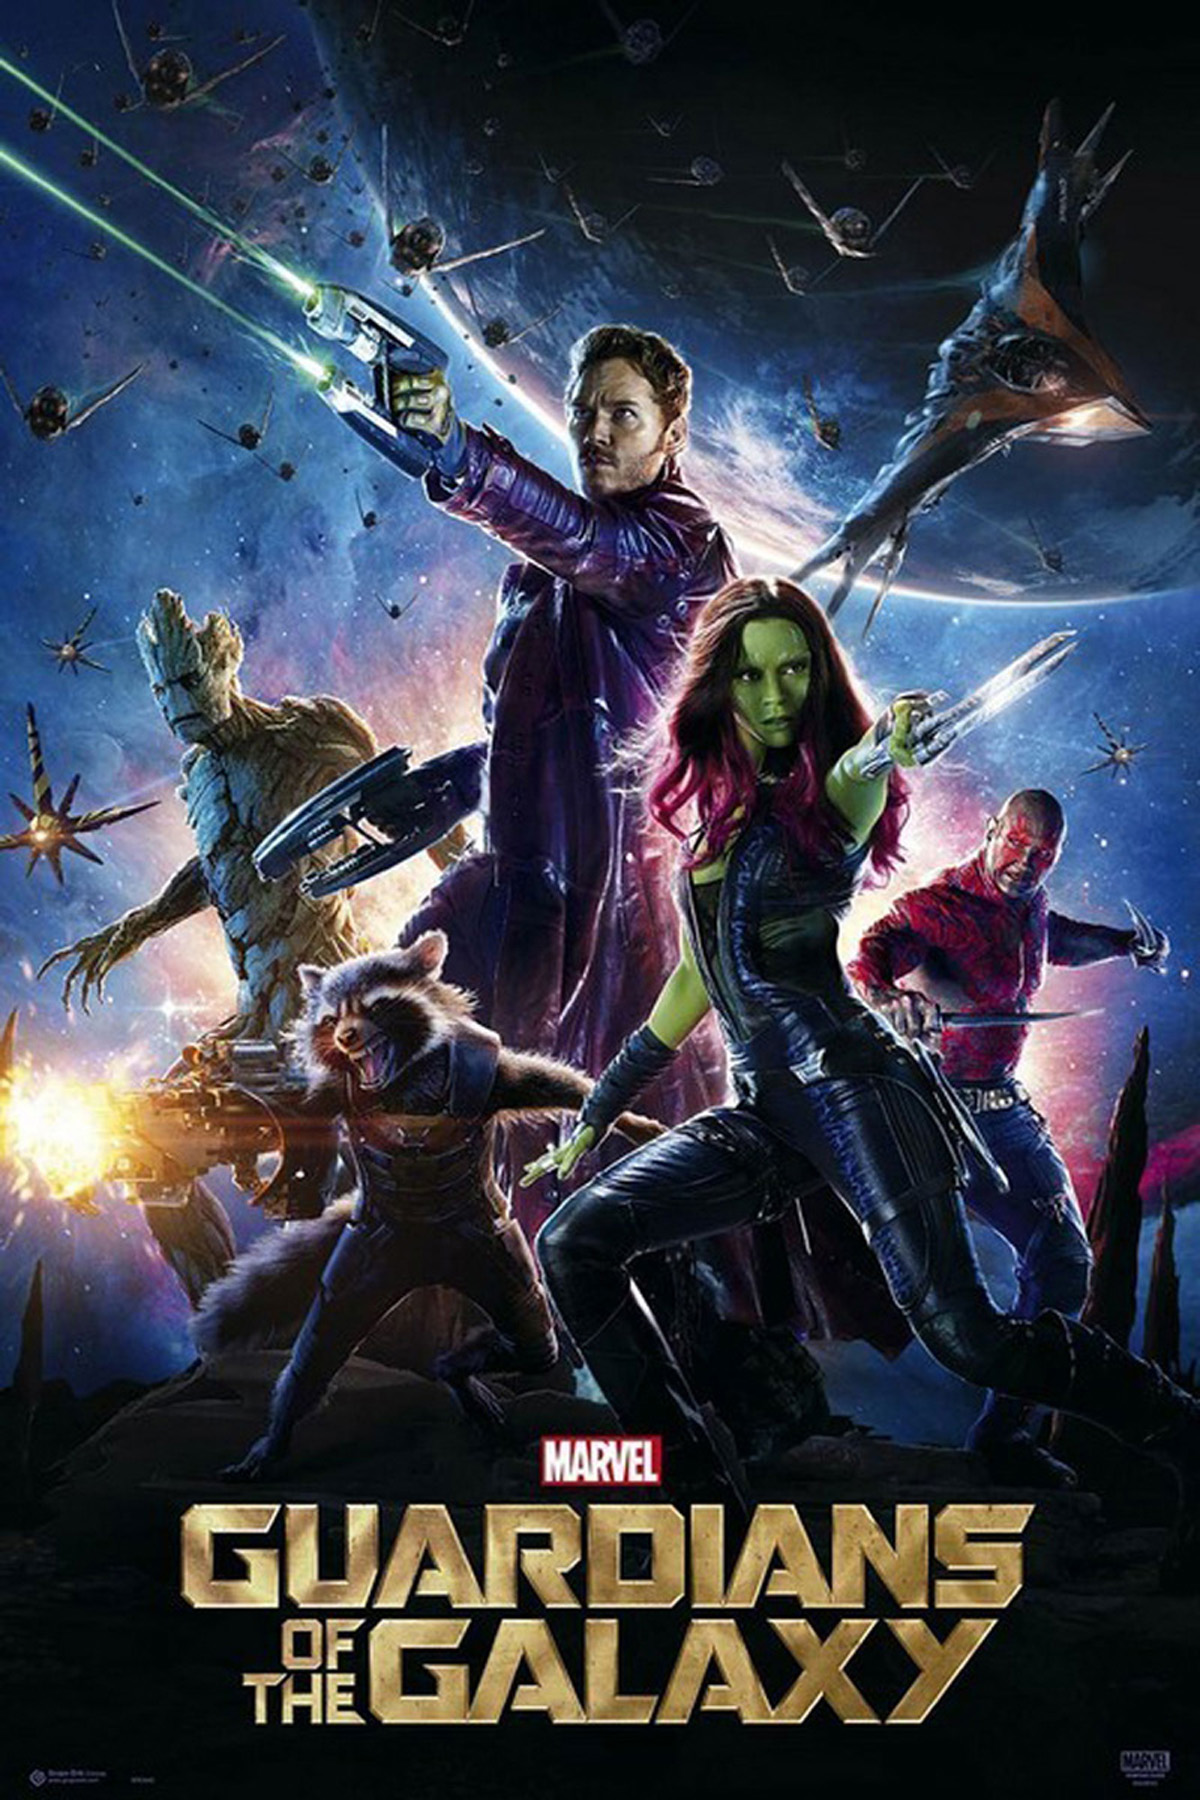 Guardians 2 One the Sheet - Galaxy - of